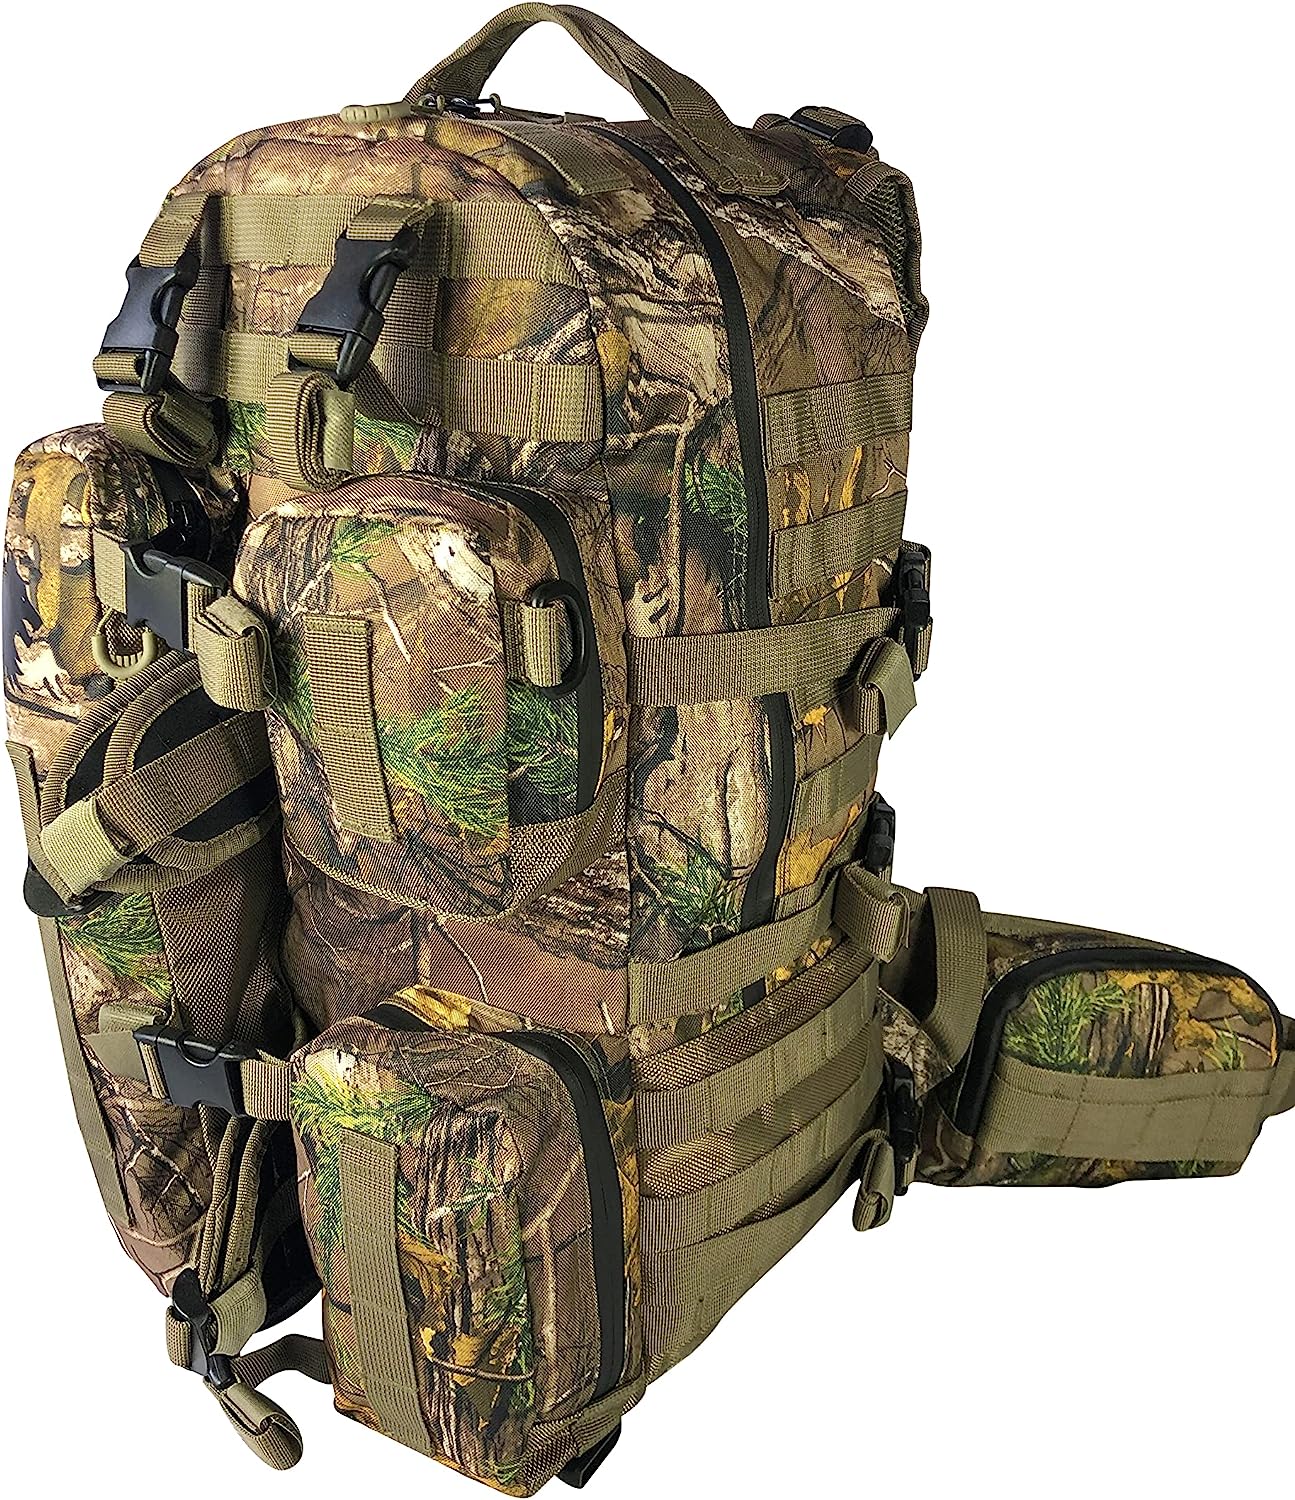 FIELDCRAFT Backpack Daypack for Rifles, Bows, Crossbows, Muzzleloader, Hunting, Hiking, Archery, Blackpowder, Outdoors Expeditionary Alpha Pack